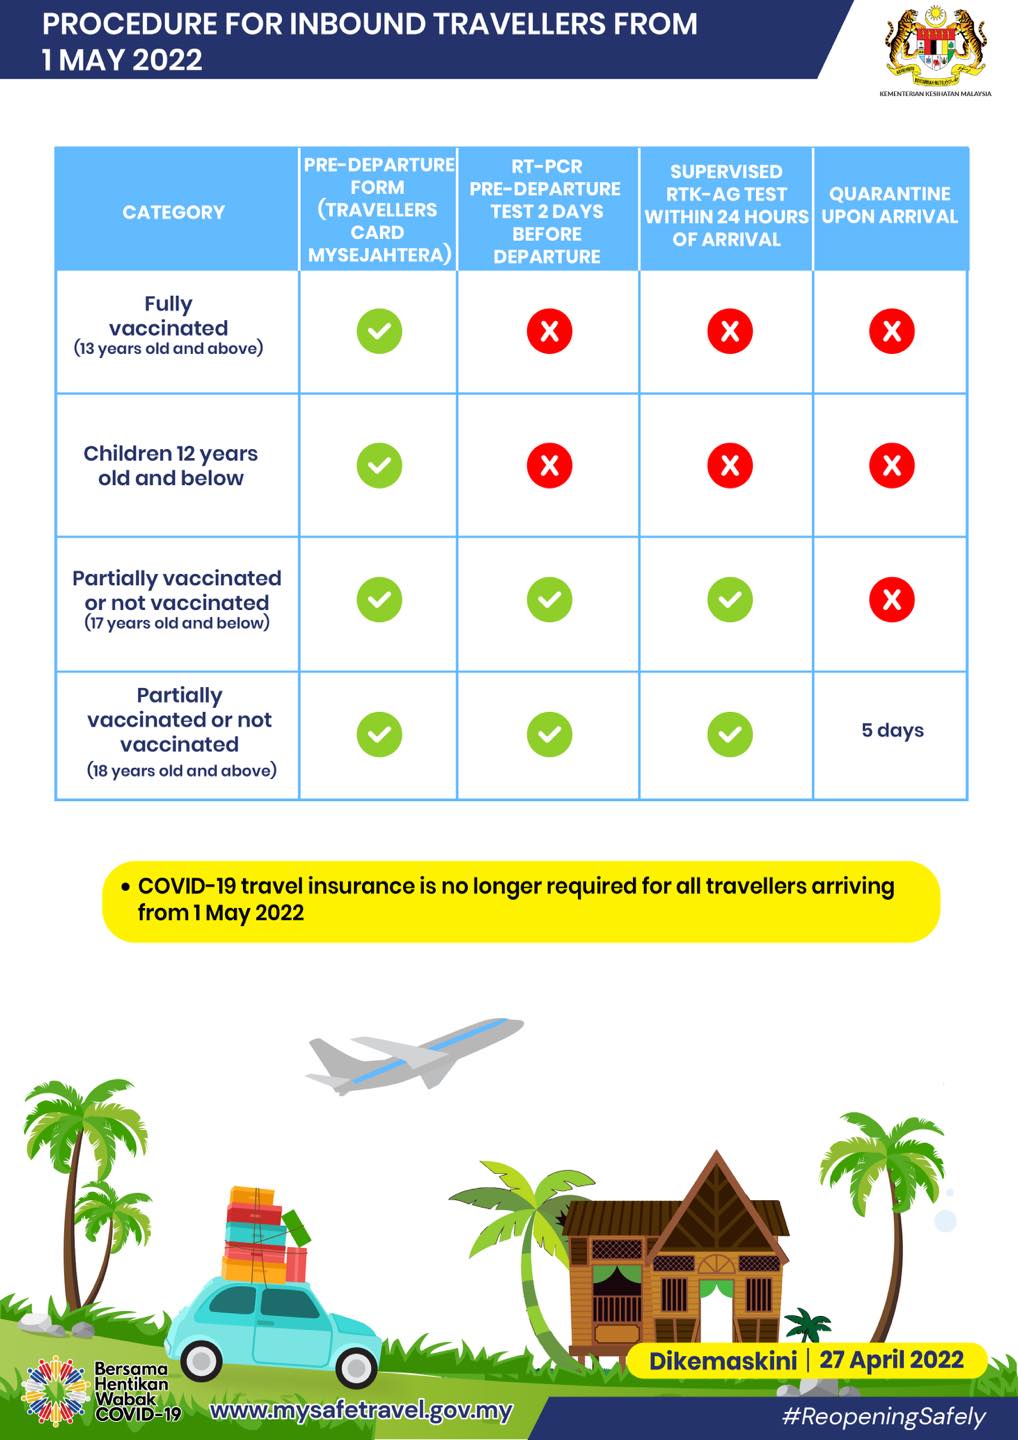 Relaxed SOPs for inbound travellers to Malaysia